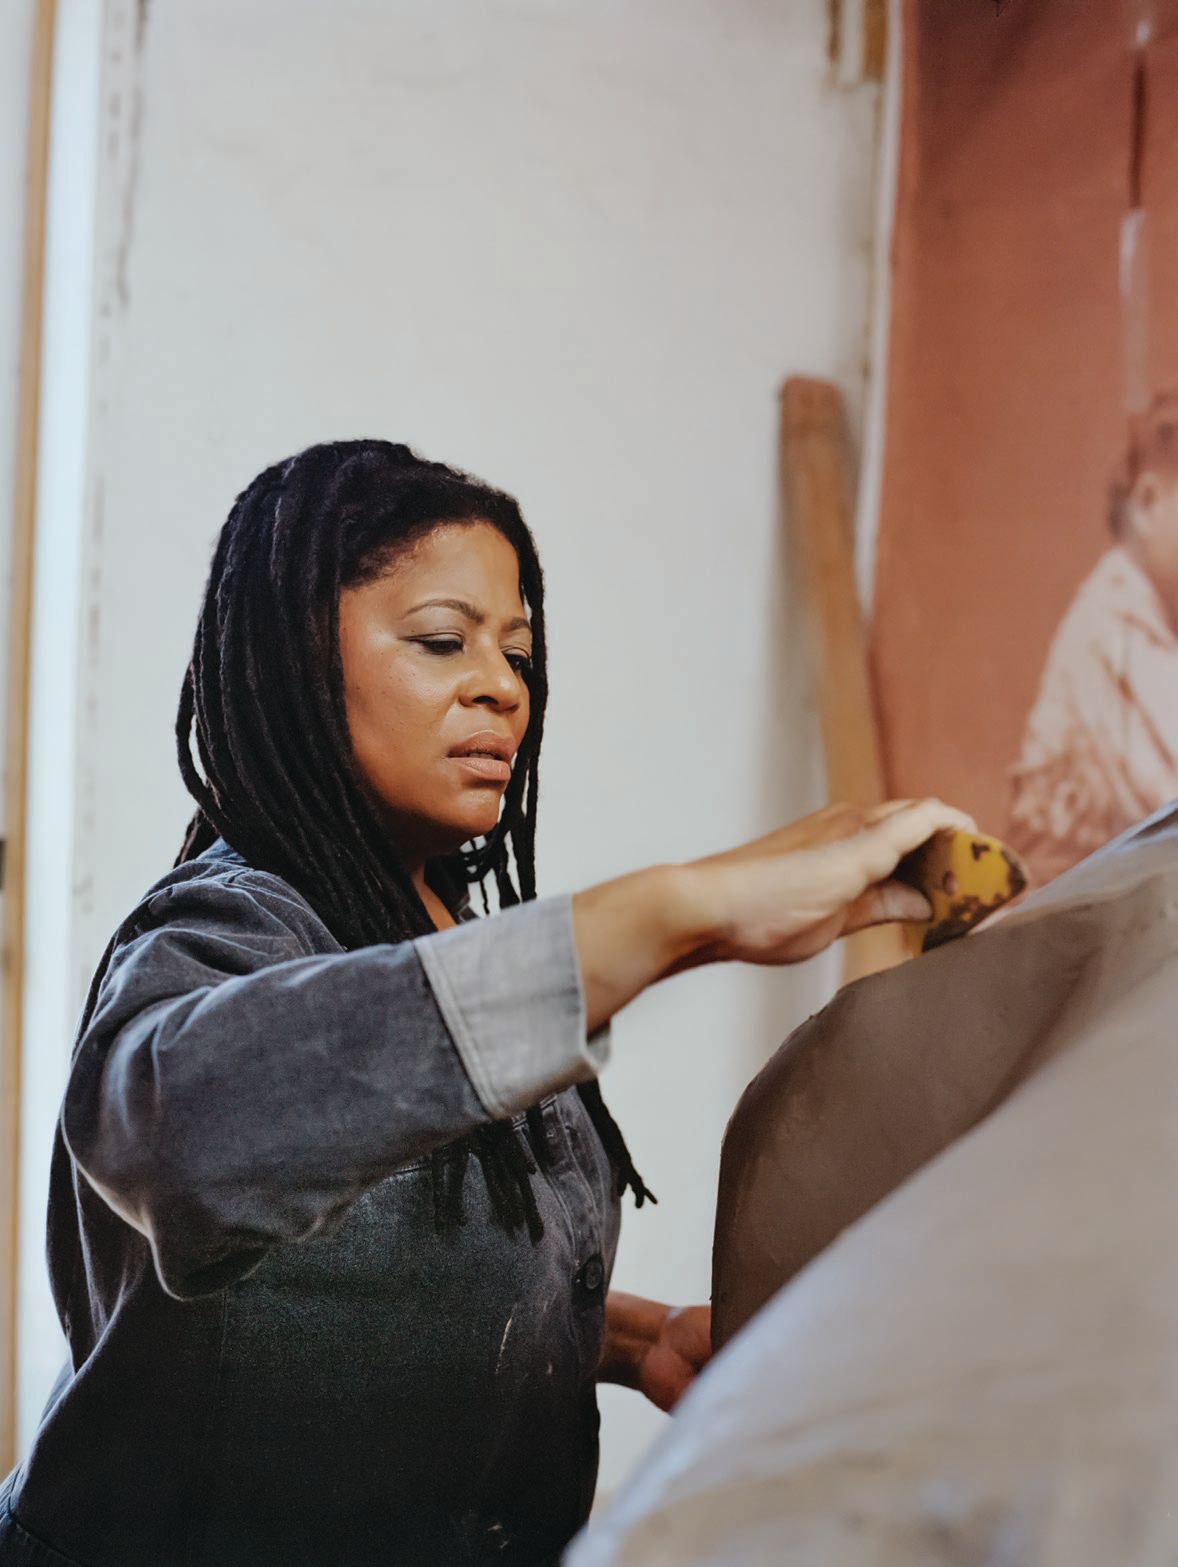 Simone Leigh at work in Brooklyn preparing for the U.S. Pavilion presentation at the Venice Biennale Arte 2022 PHOTO BY SHANIQWA JARVIS/COURTESY OF THE ARTIST AND MATTHEW MARKS GALLERY